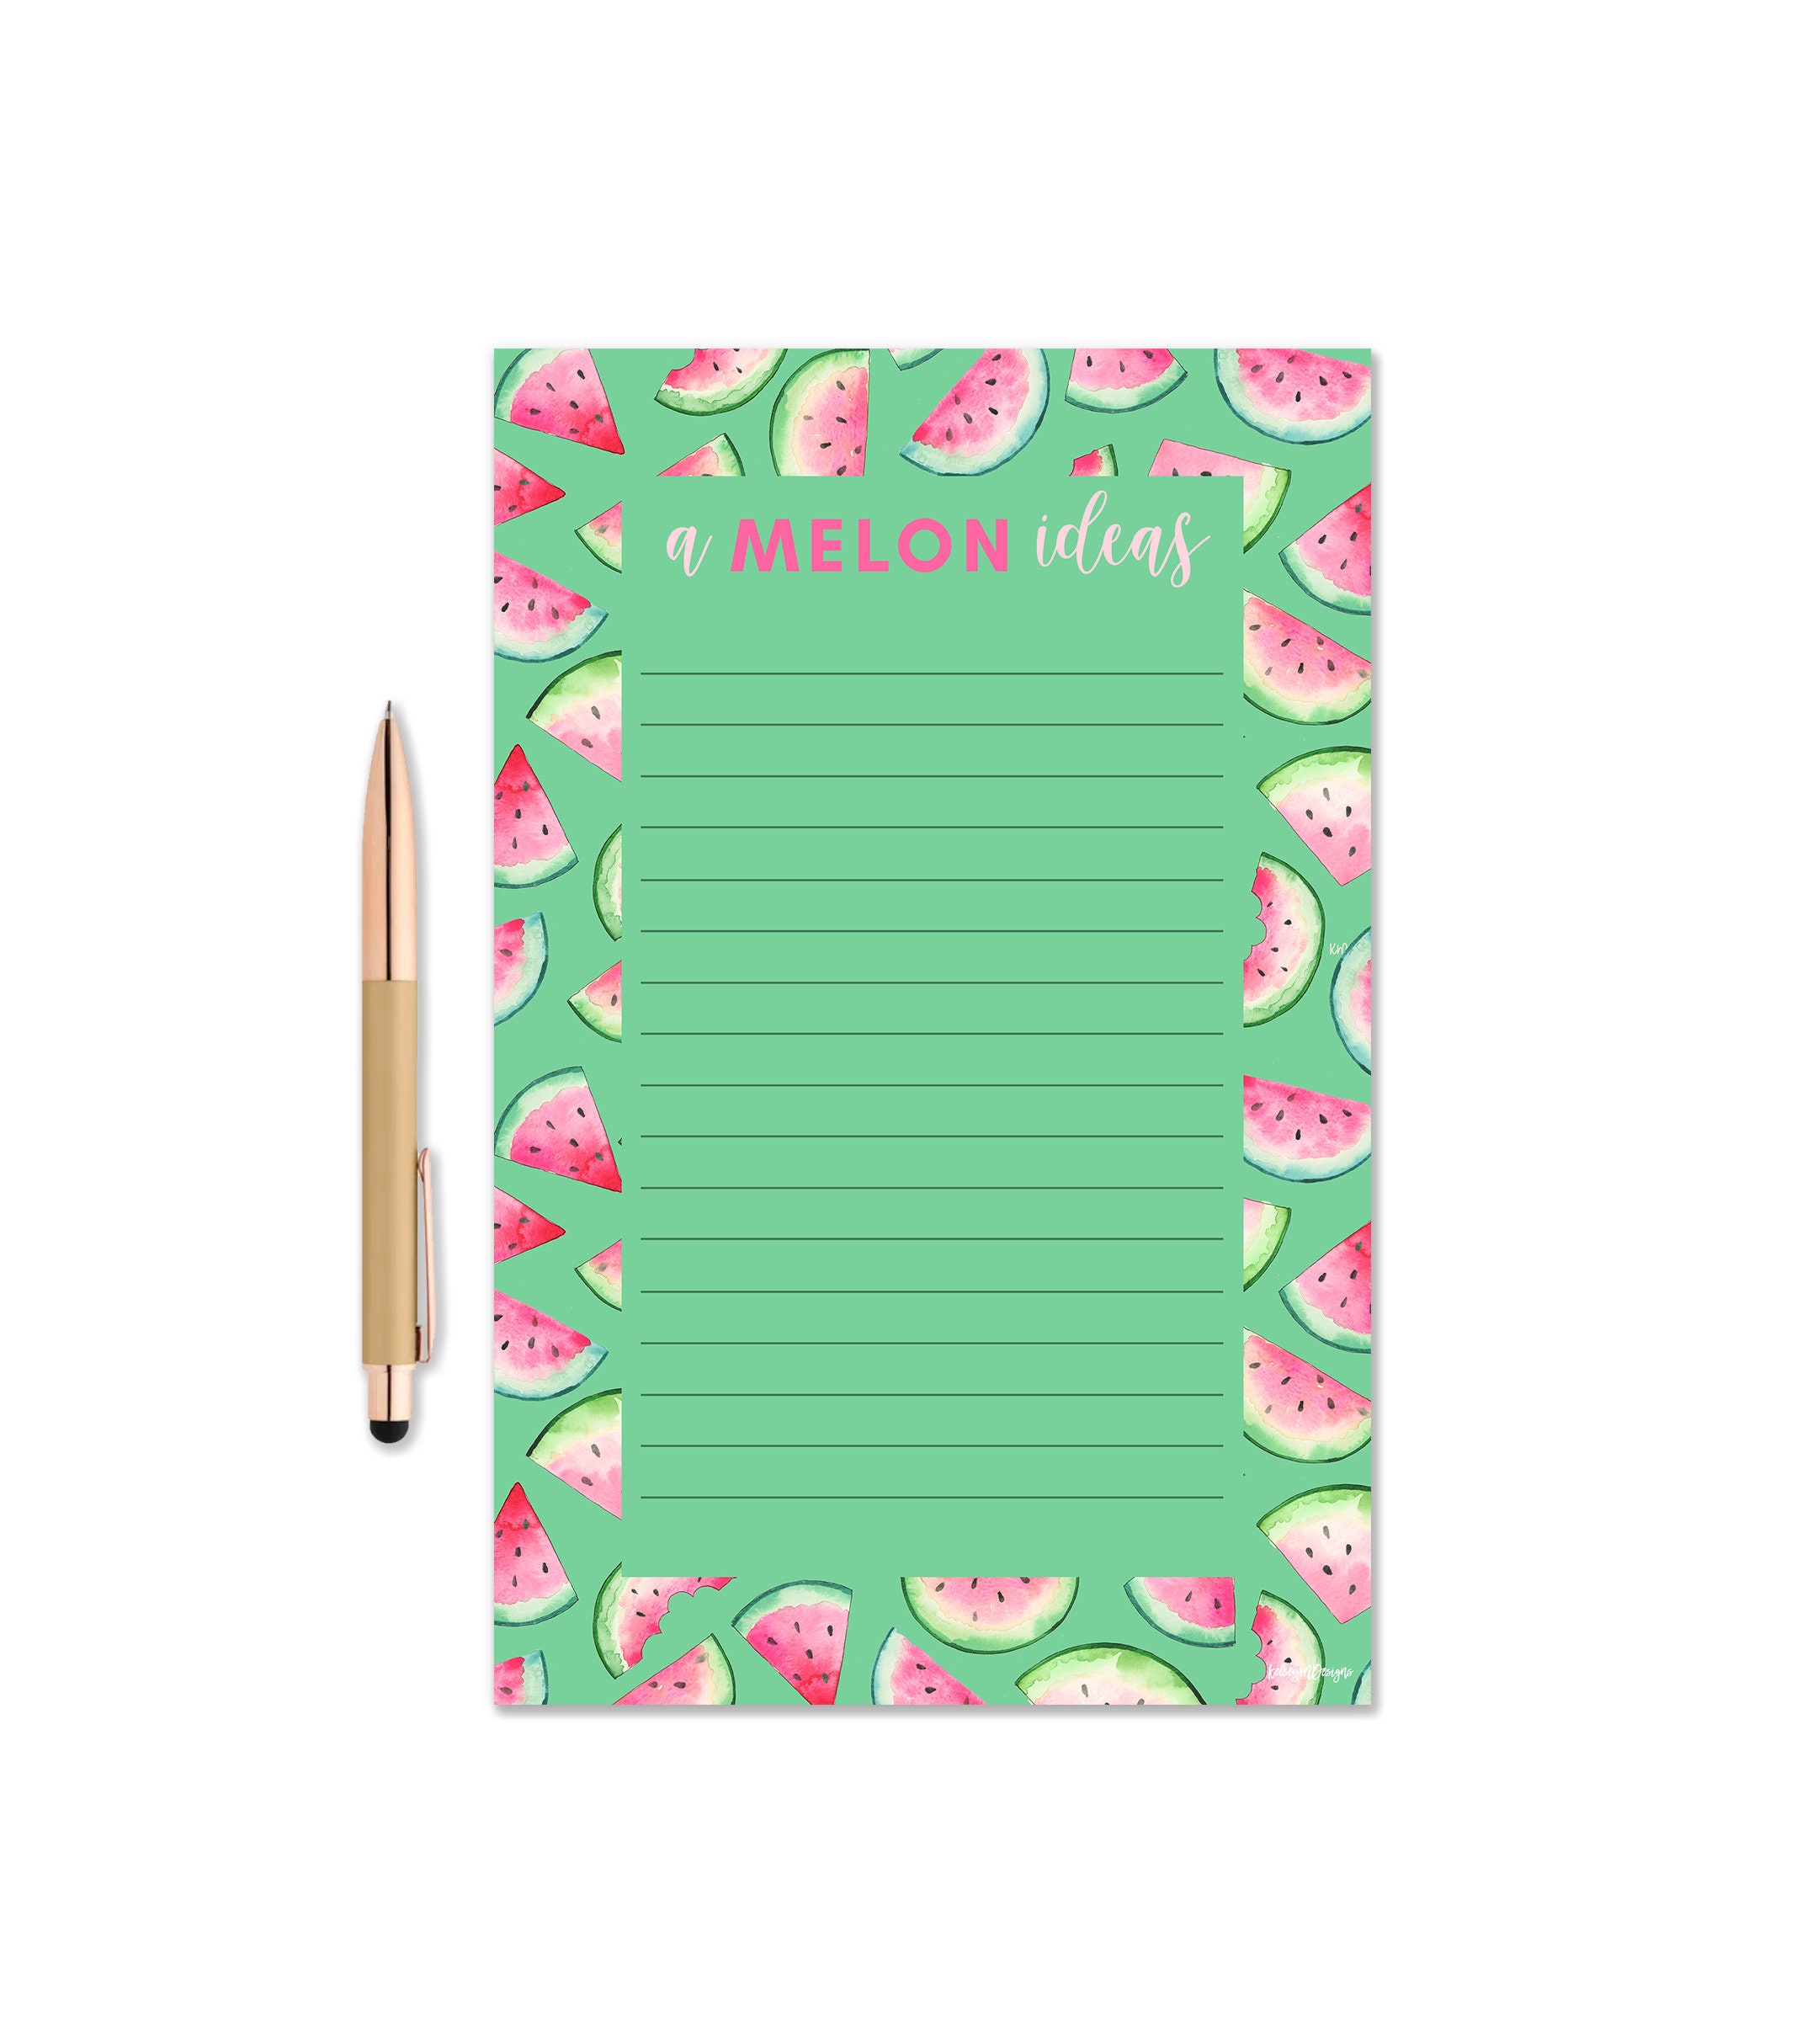 Kids Letter Writing Set Girls Watermelon Stationery Paper Camp